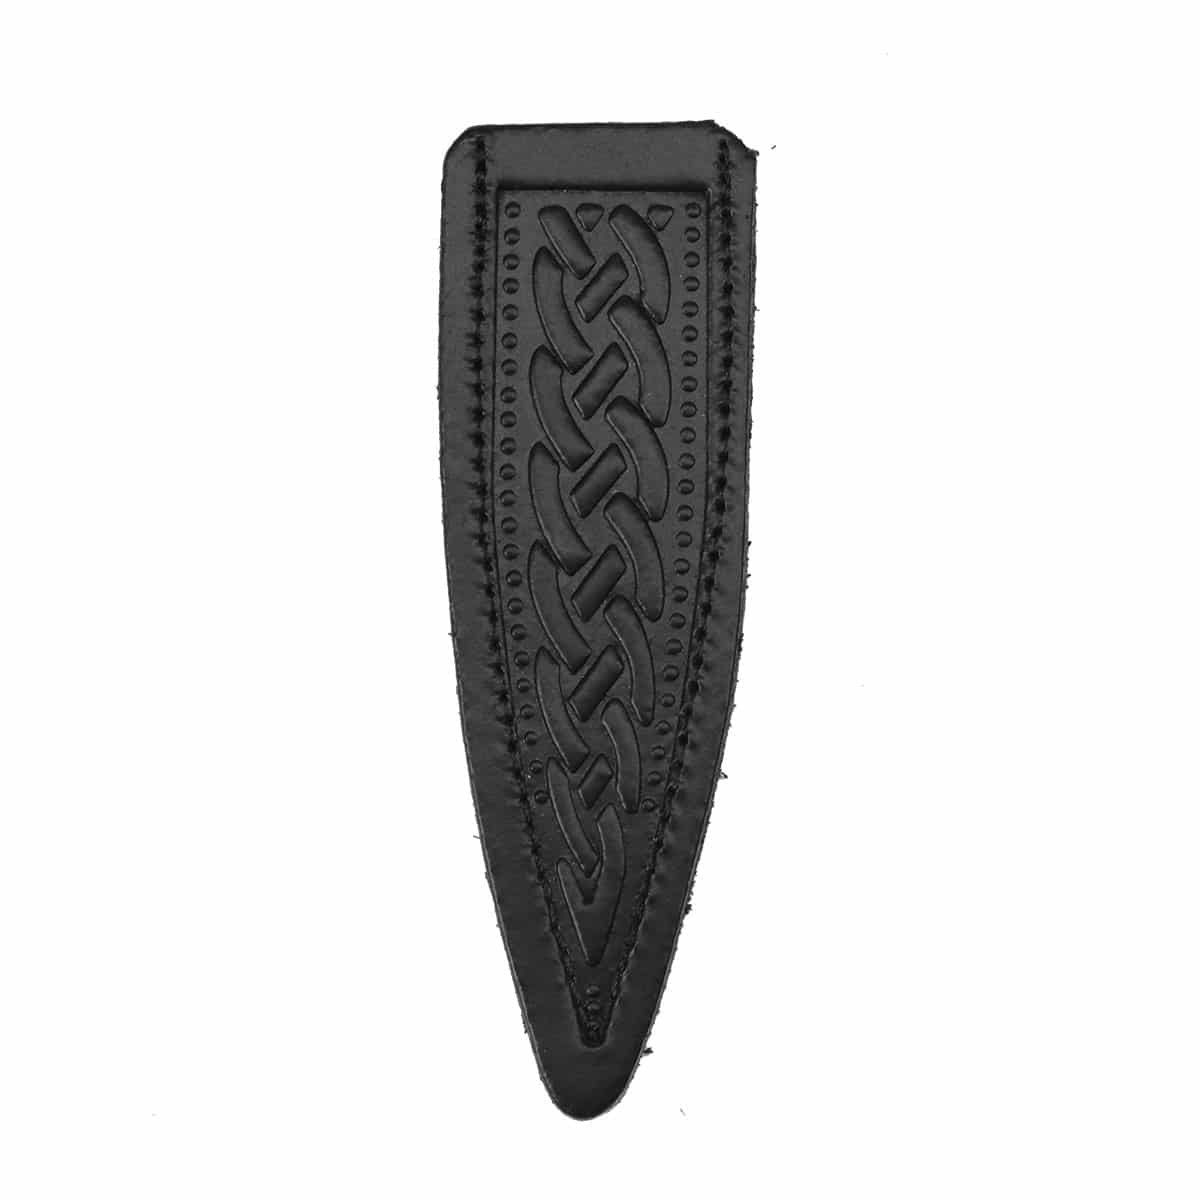 A Clan Crest Stag Handle Sgian Dubh, perfect for adding a touch of elegance to any outfit.